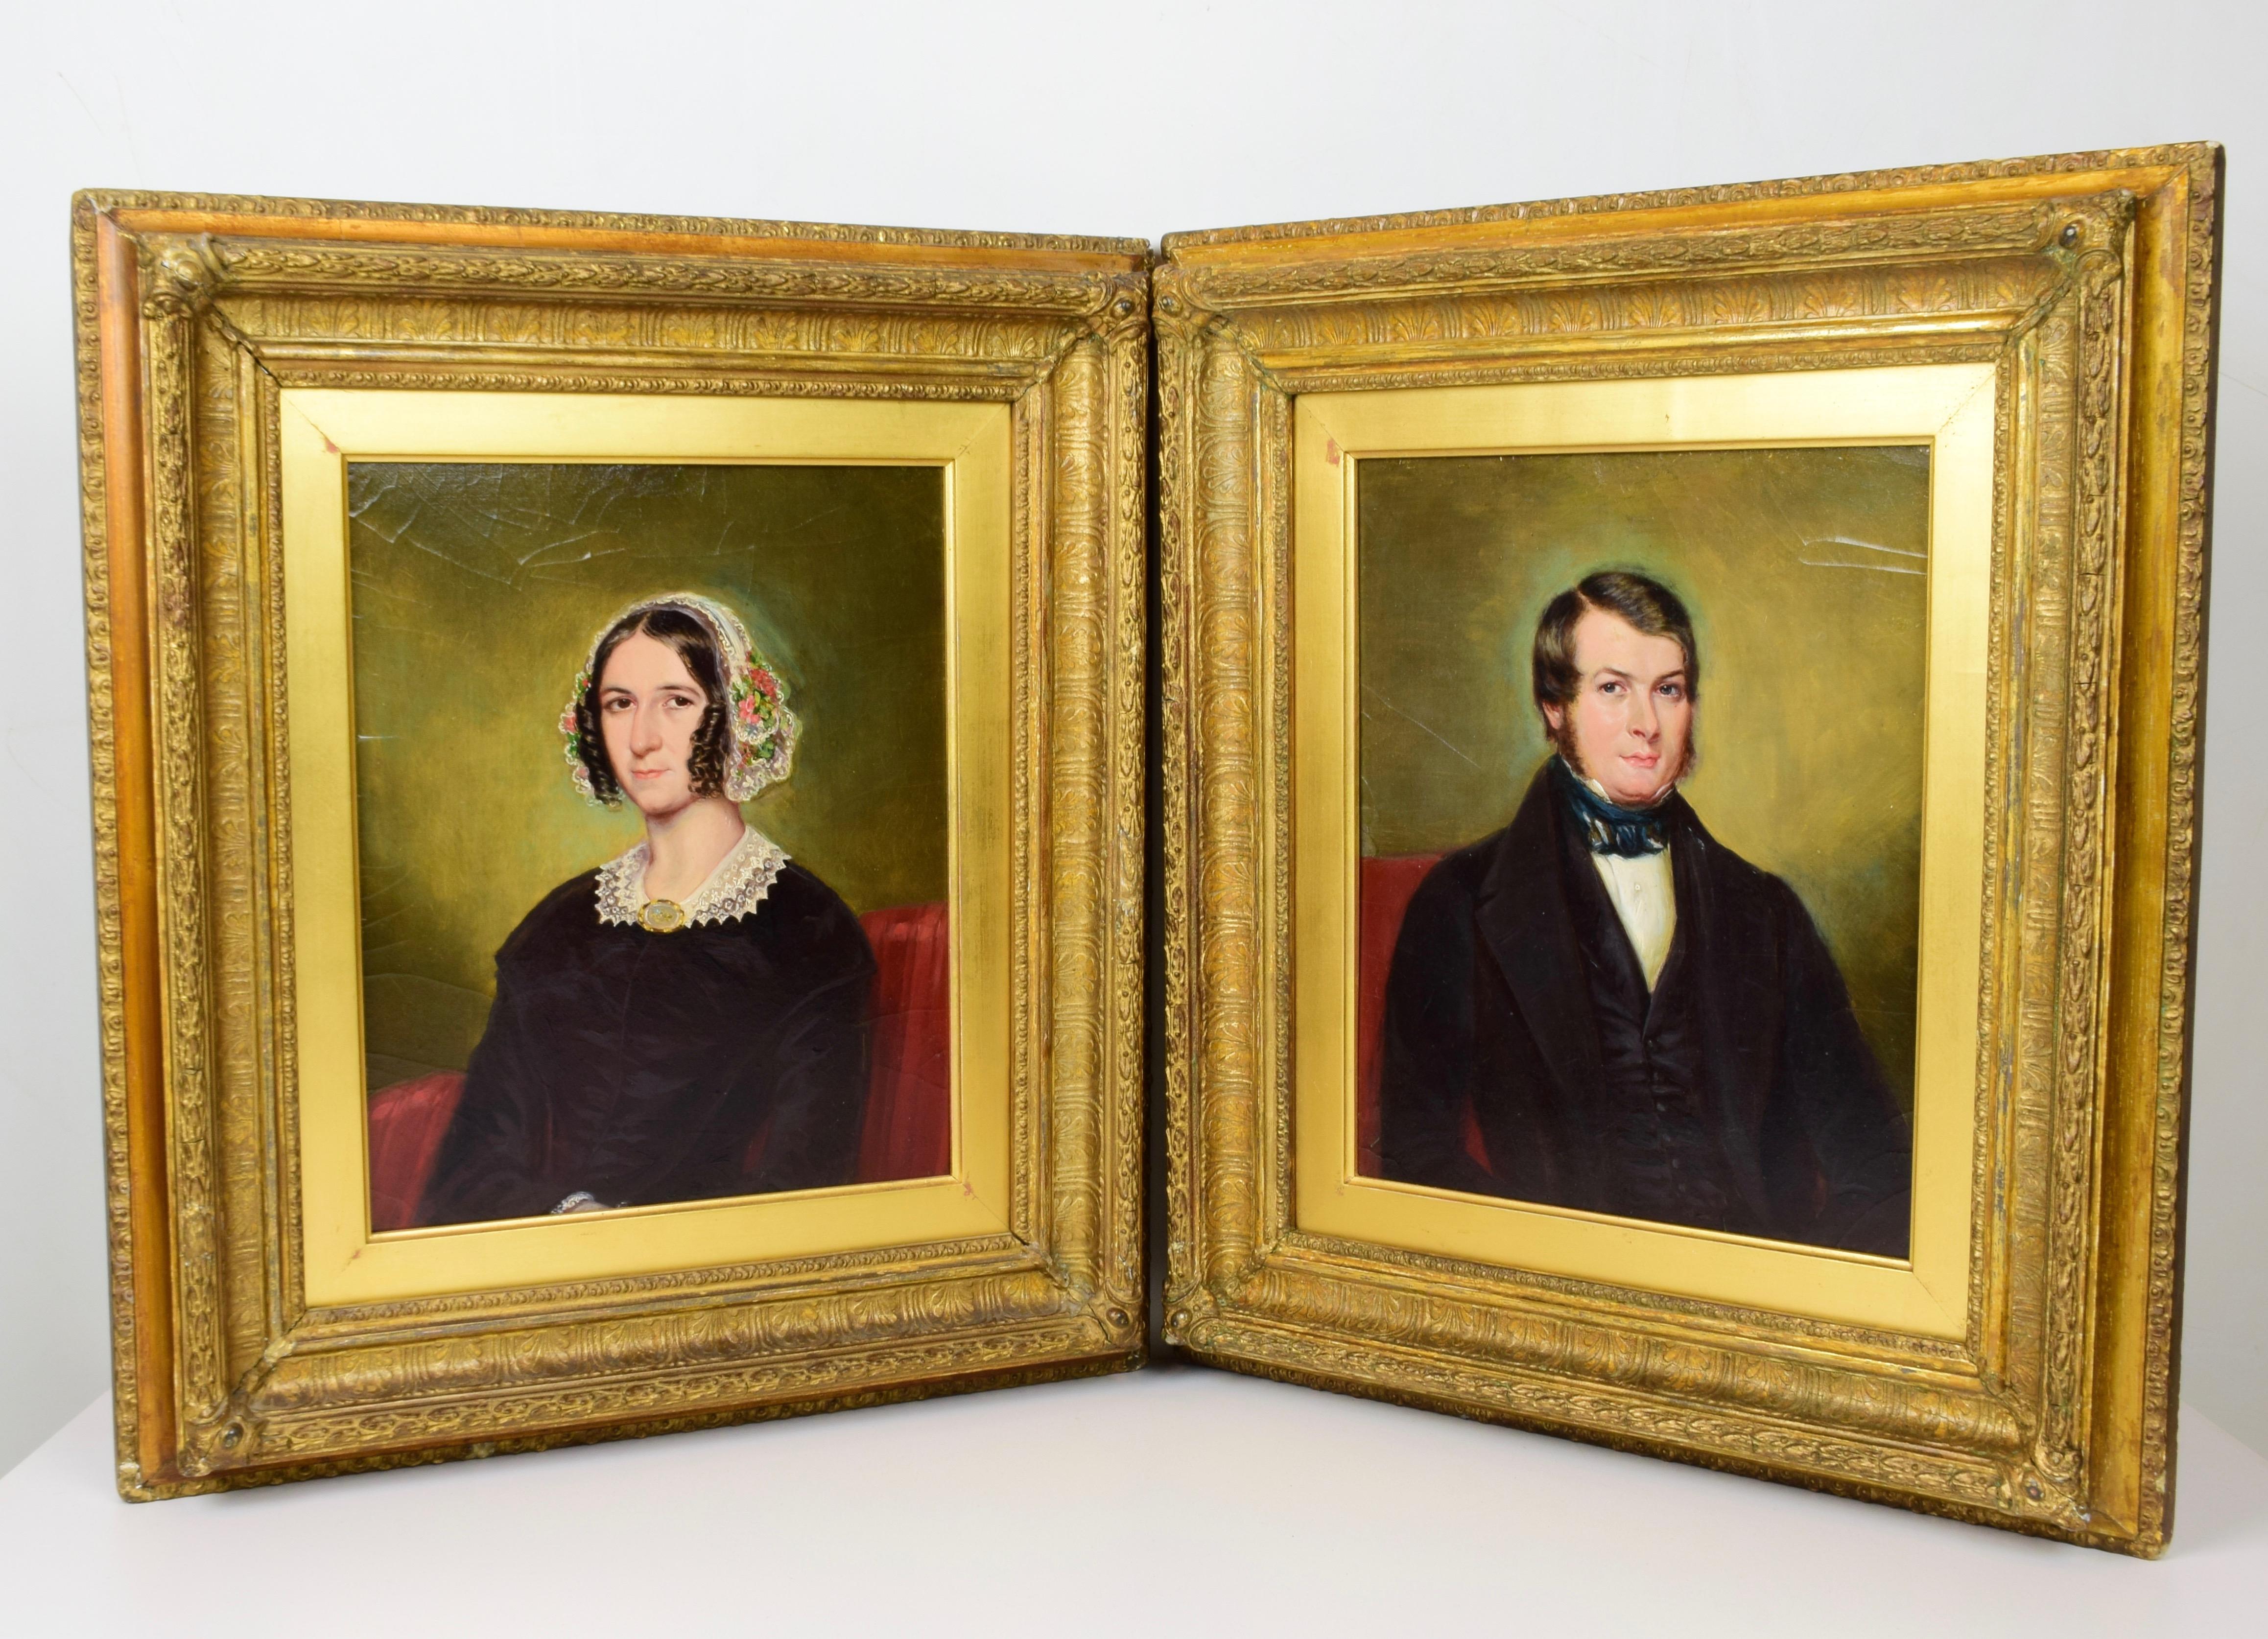 English school, mid 19th century
Oil on cardboard
Golden frames
Measures with frame 43 x 48 cm each.